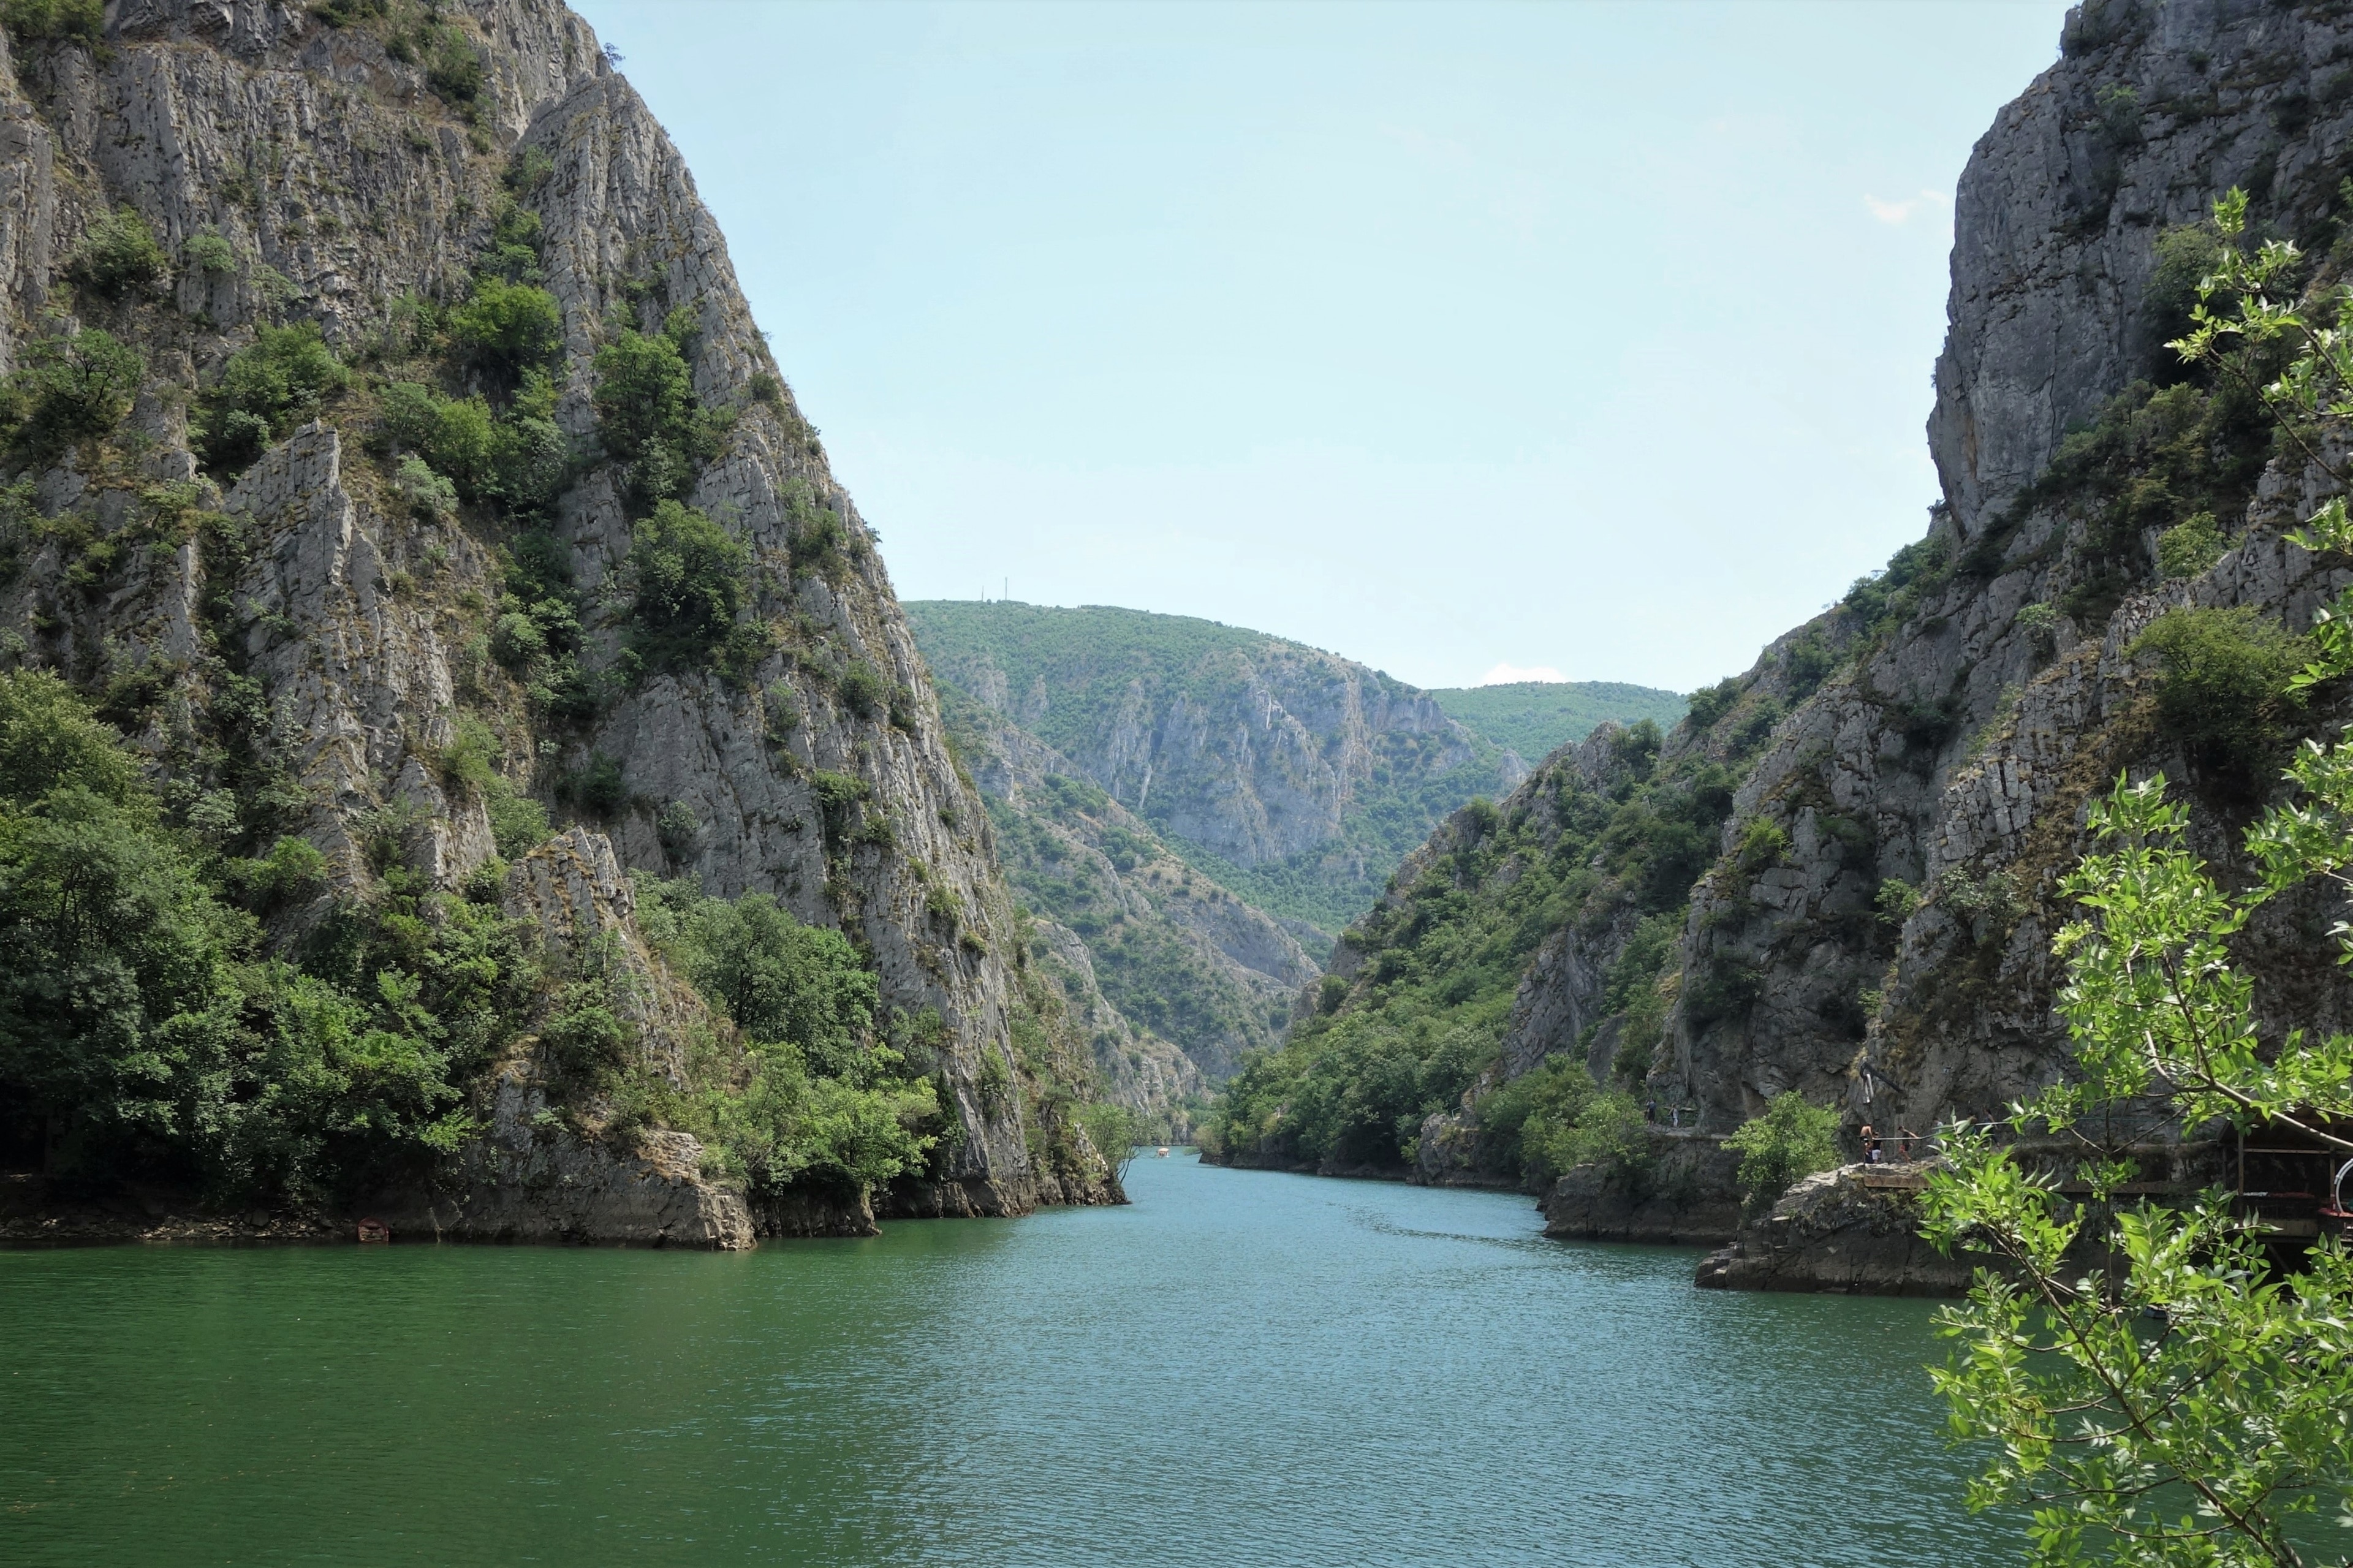 The Matka Canyon, a gorge in which a rich complex of mediaeval building survives, including churches, monasteries and remnants of a fortress (the mediaeval town of Matka). The canyon is open for kayaking.